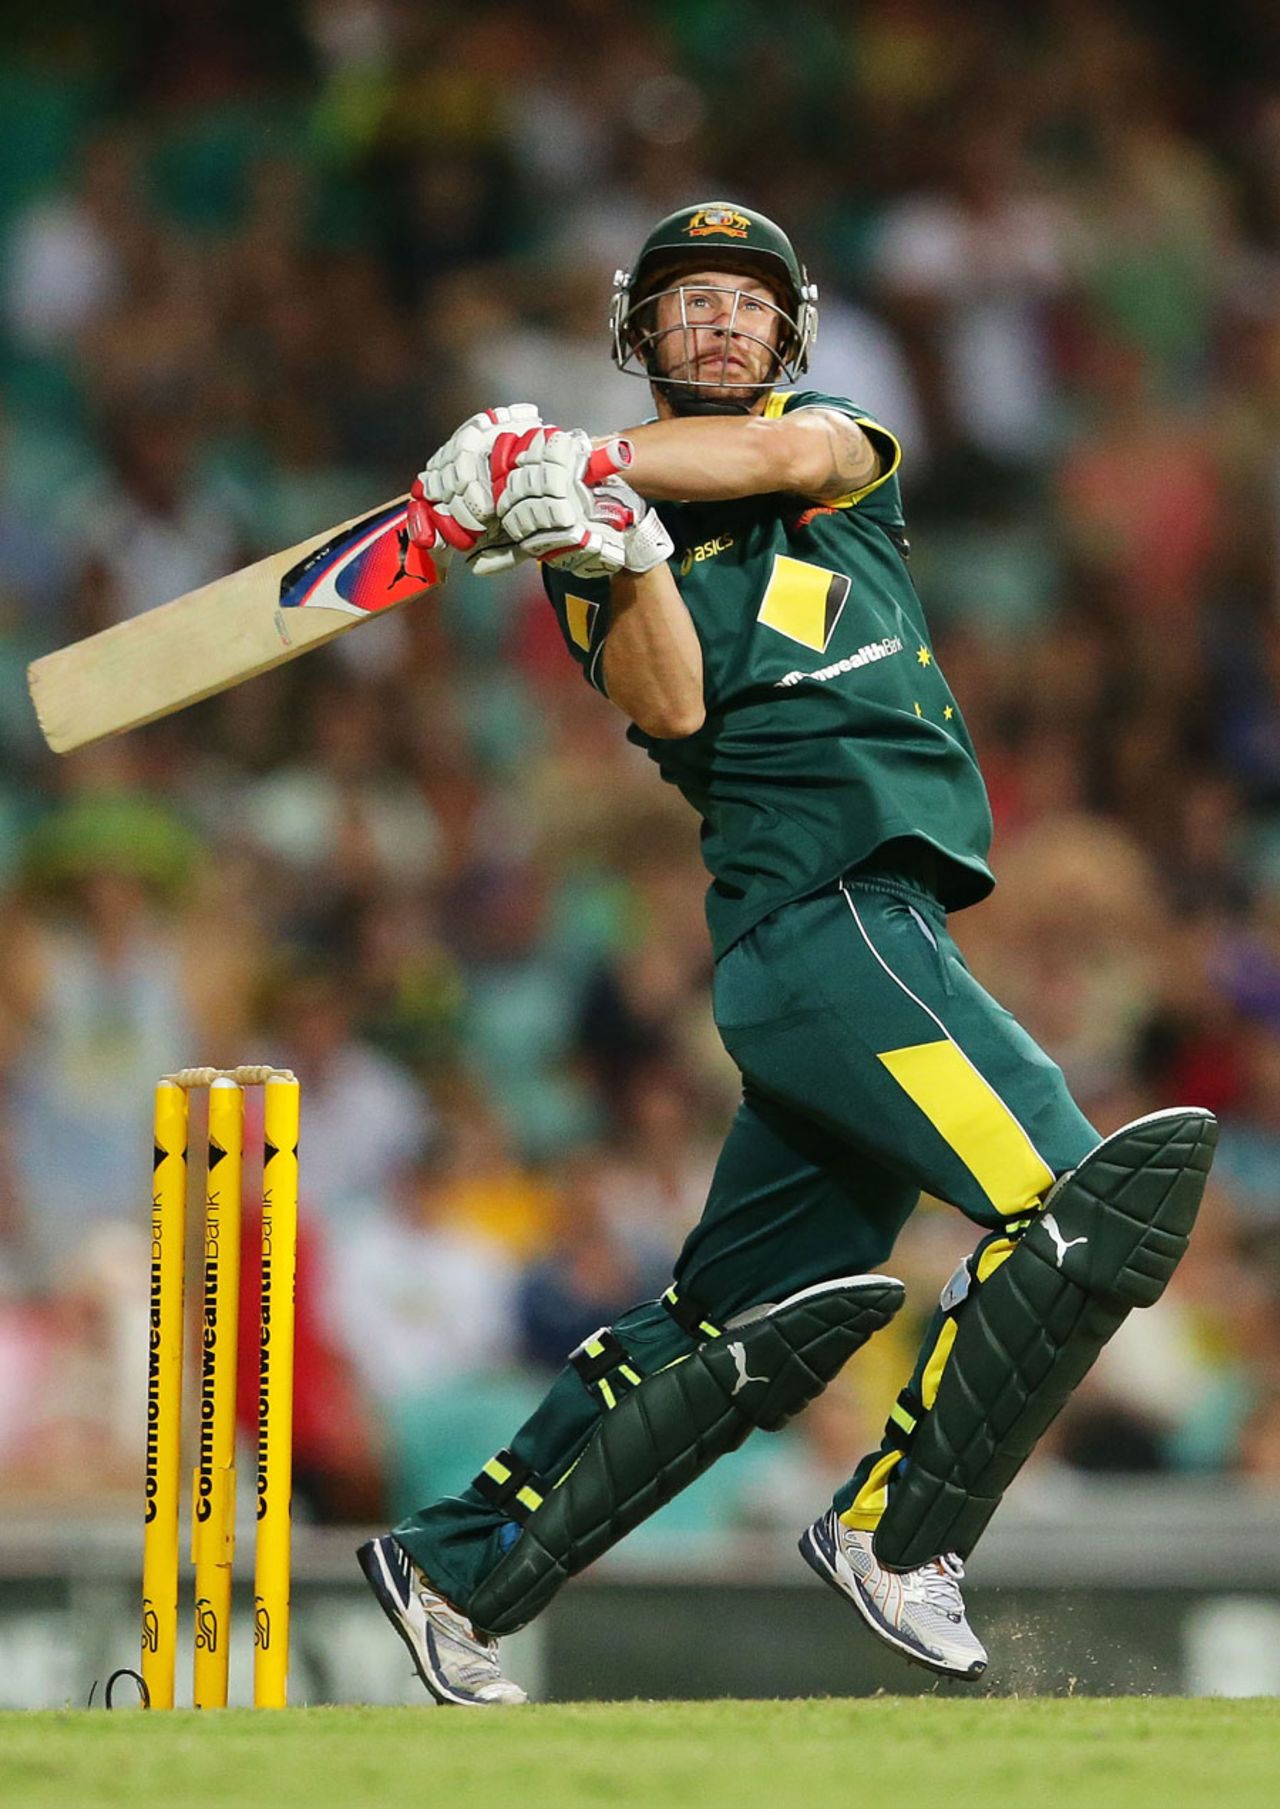 Matthew Wade knocked off quick runs at the end, Australia v West Indies, 4th ODI, Sydney, February 8, 2013